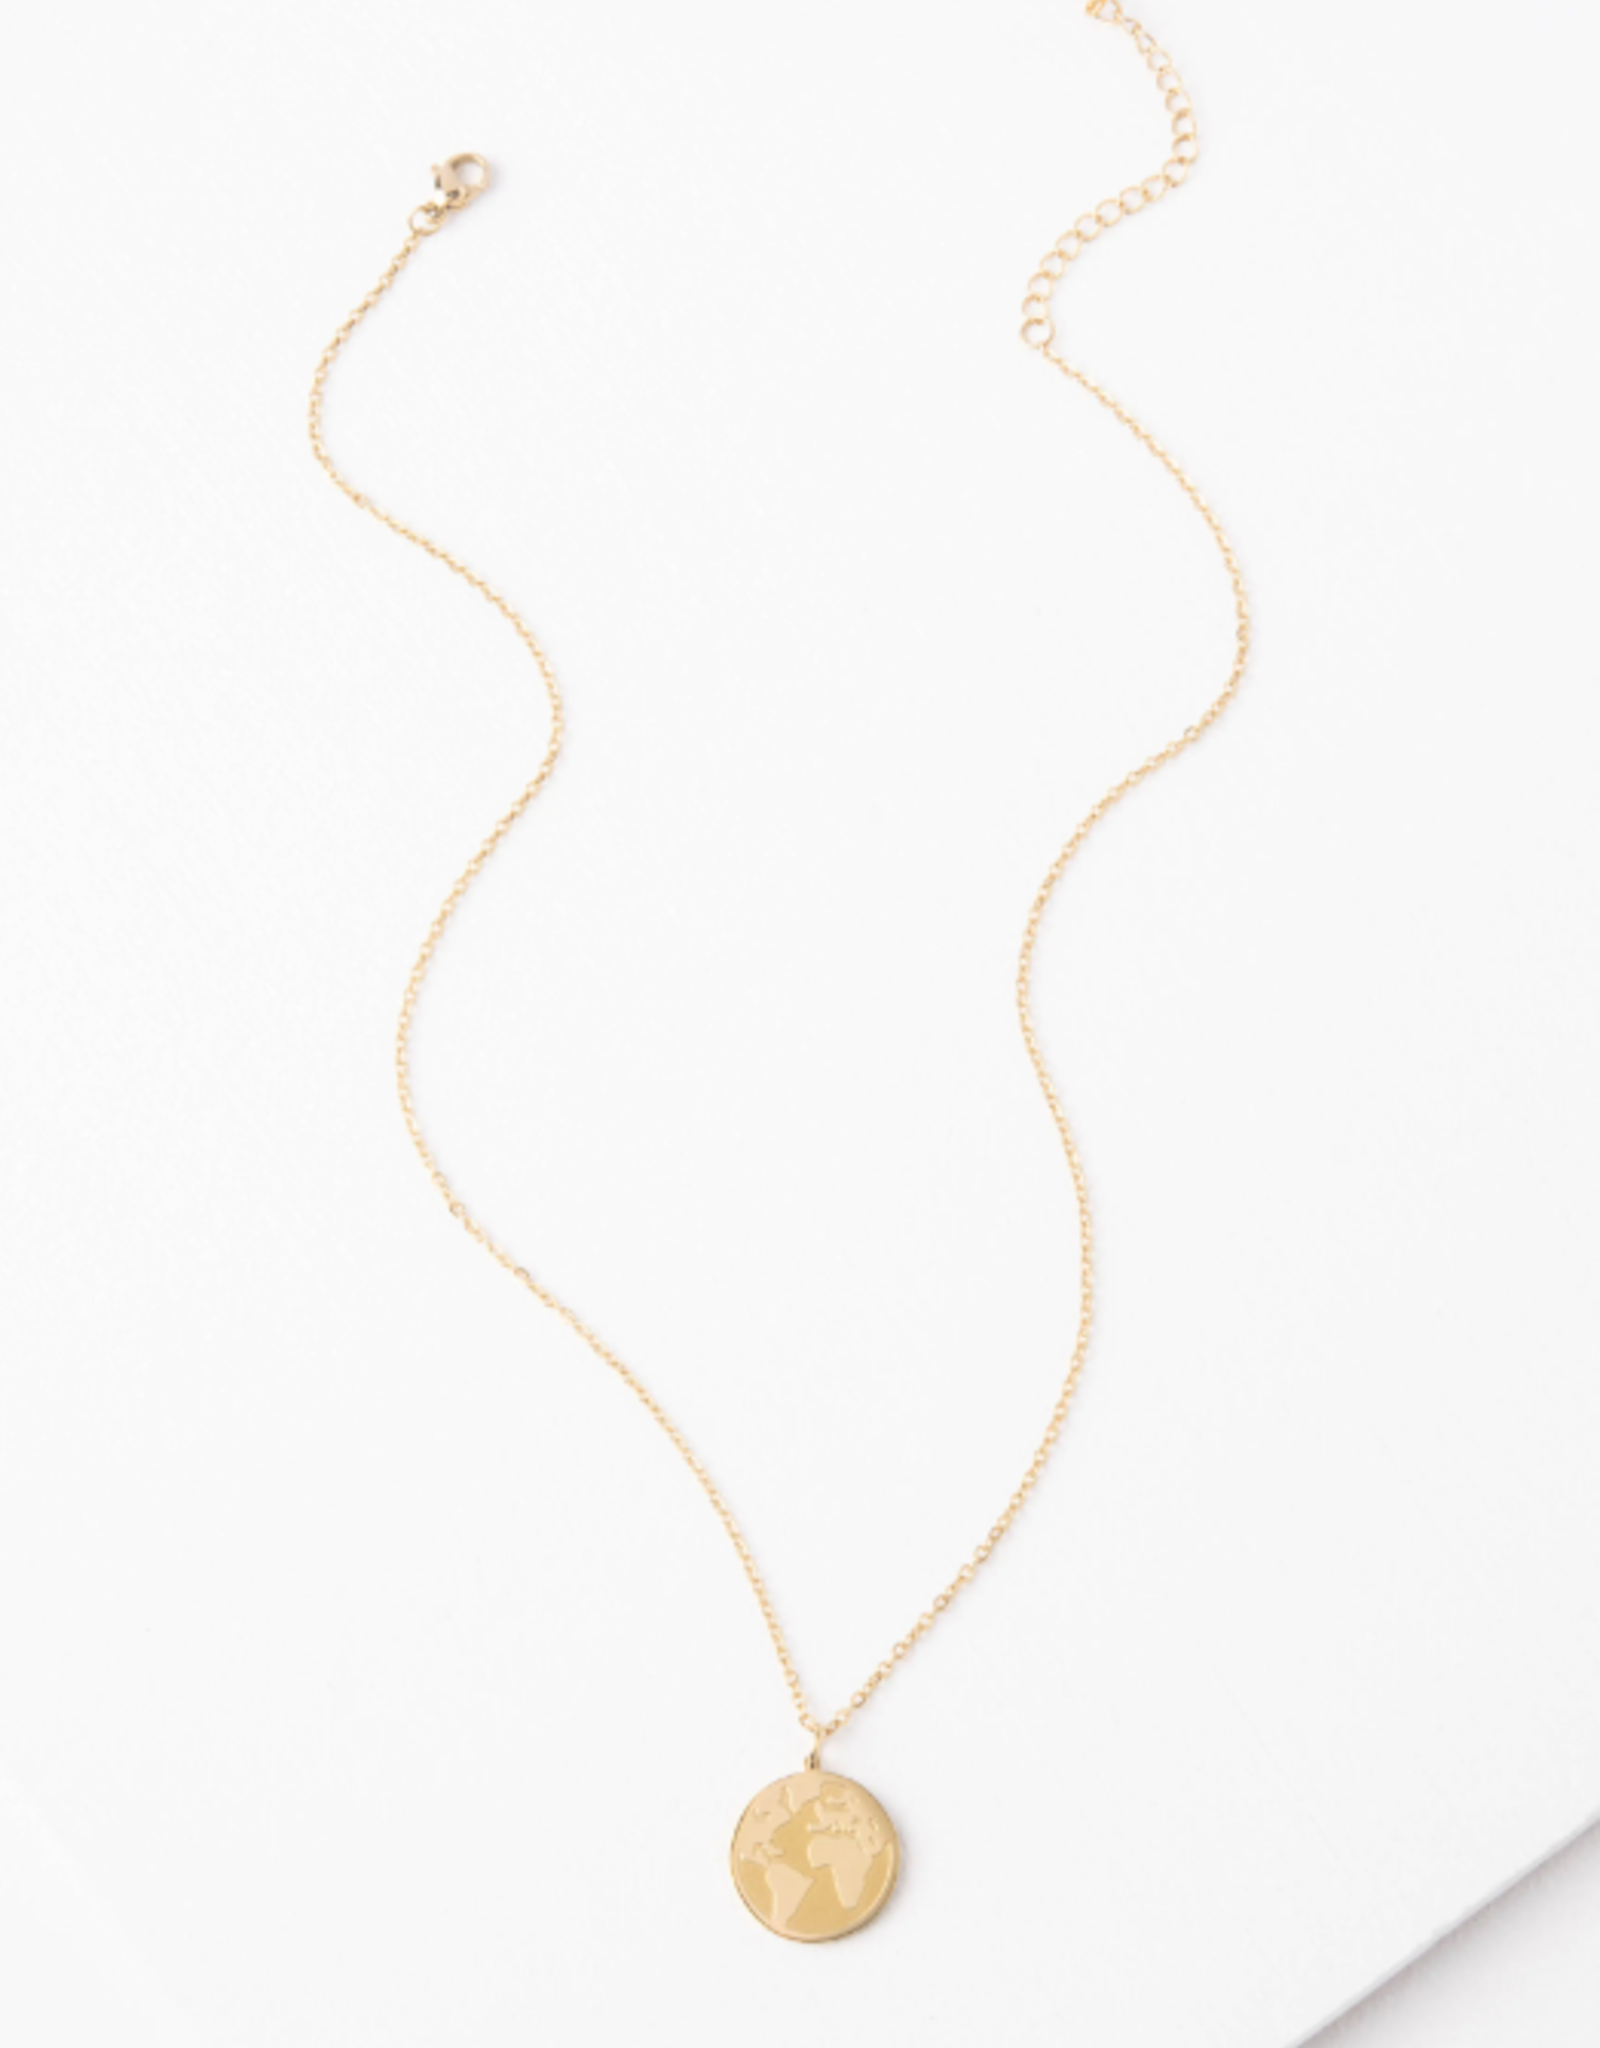 UNITY Simple Necklace with Small Pendant in Silver & Gold Plated